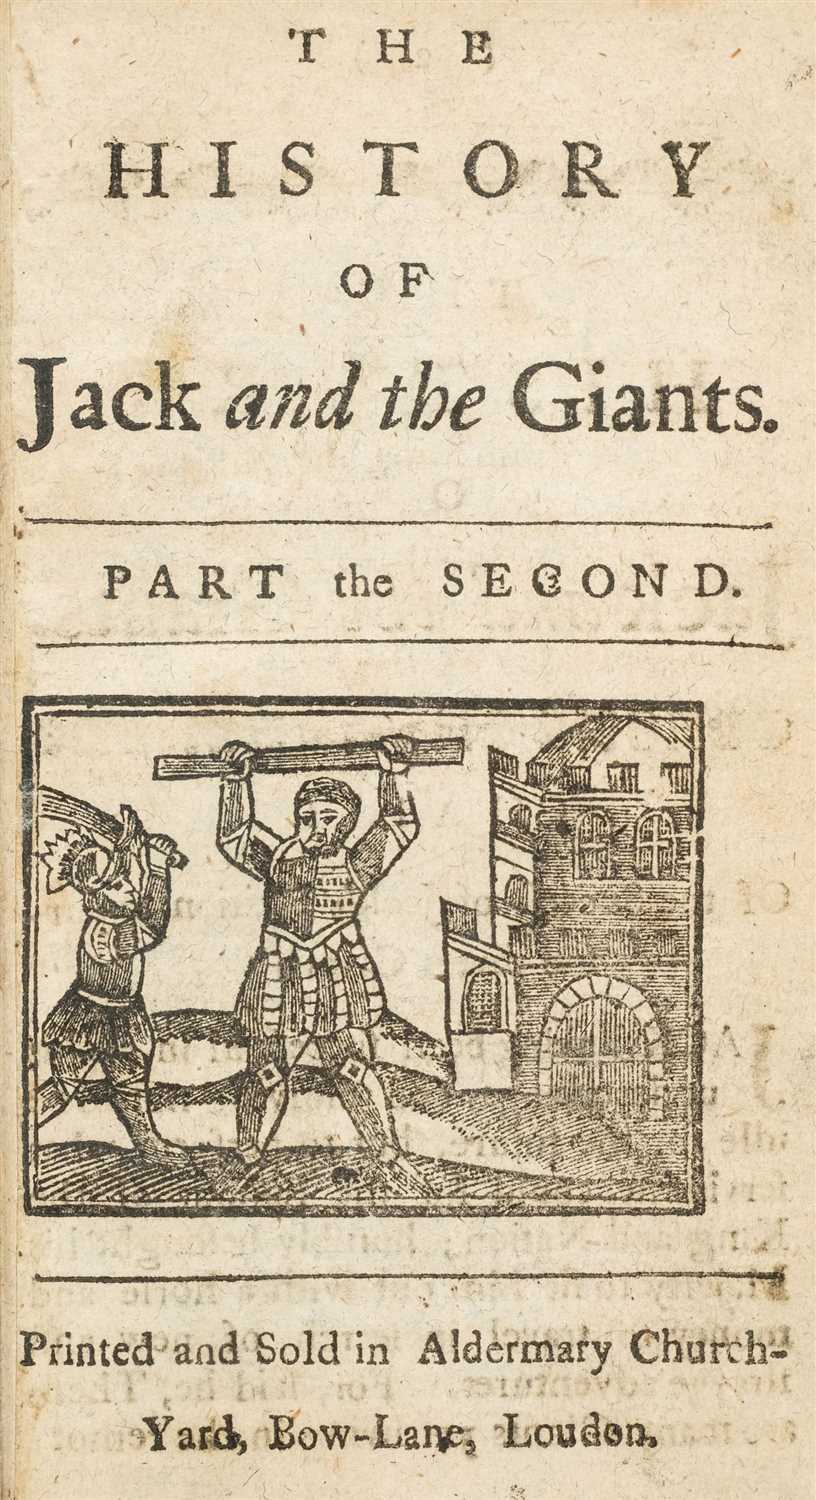 Lot 232 - Chapbook. The History of Jack and the Giants, between circa 1754 and 1770